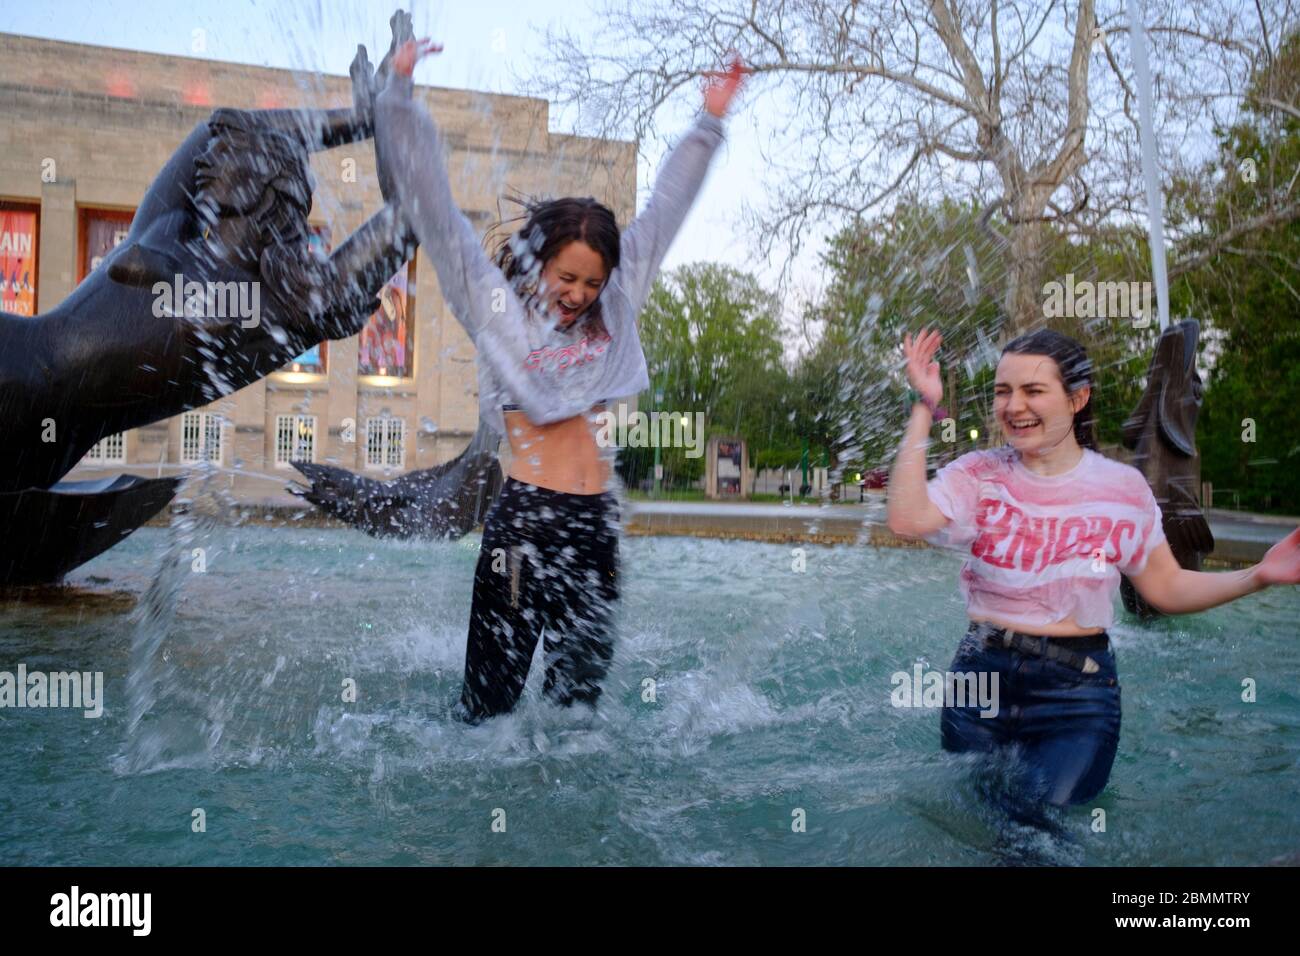 Bloomington, United States. 09th May, 2020. Two women splash water as a group of Indiana University students who just finished graduating from the Kelley School of business during a video ceremony this weekend celebrate afterwards by jumping into waters of the Show-alter Fountain and posing for photographs.Classes at IU were taught virtually since spring break due to the COVID-19/Coronavirus pandemic, and in person classes were cancelled and the in person annual graduation ceremony was also cancelled. Credit: SOPA Images Limited/Alamy Live News Stock Photo